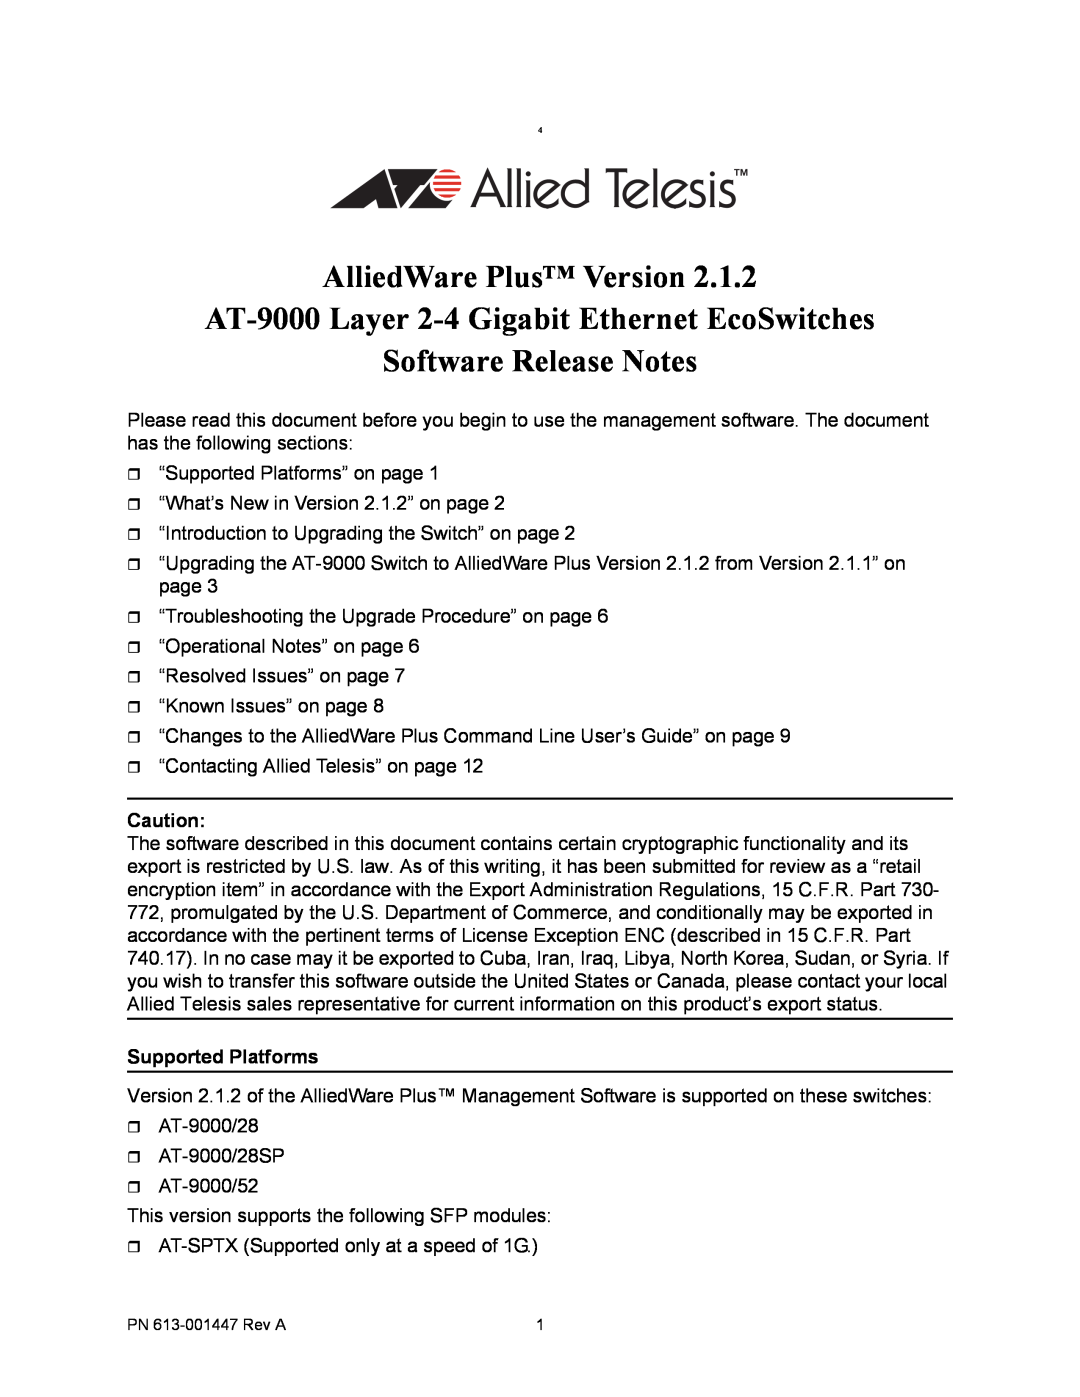 Allied Telesis AT-9000 manual Supported Platforms, AlliedWare Plus Version 